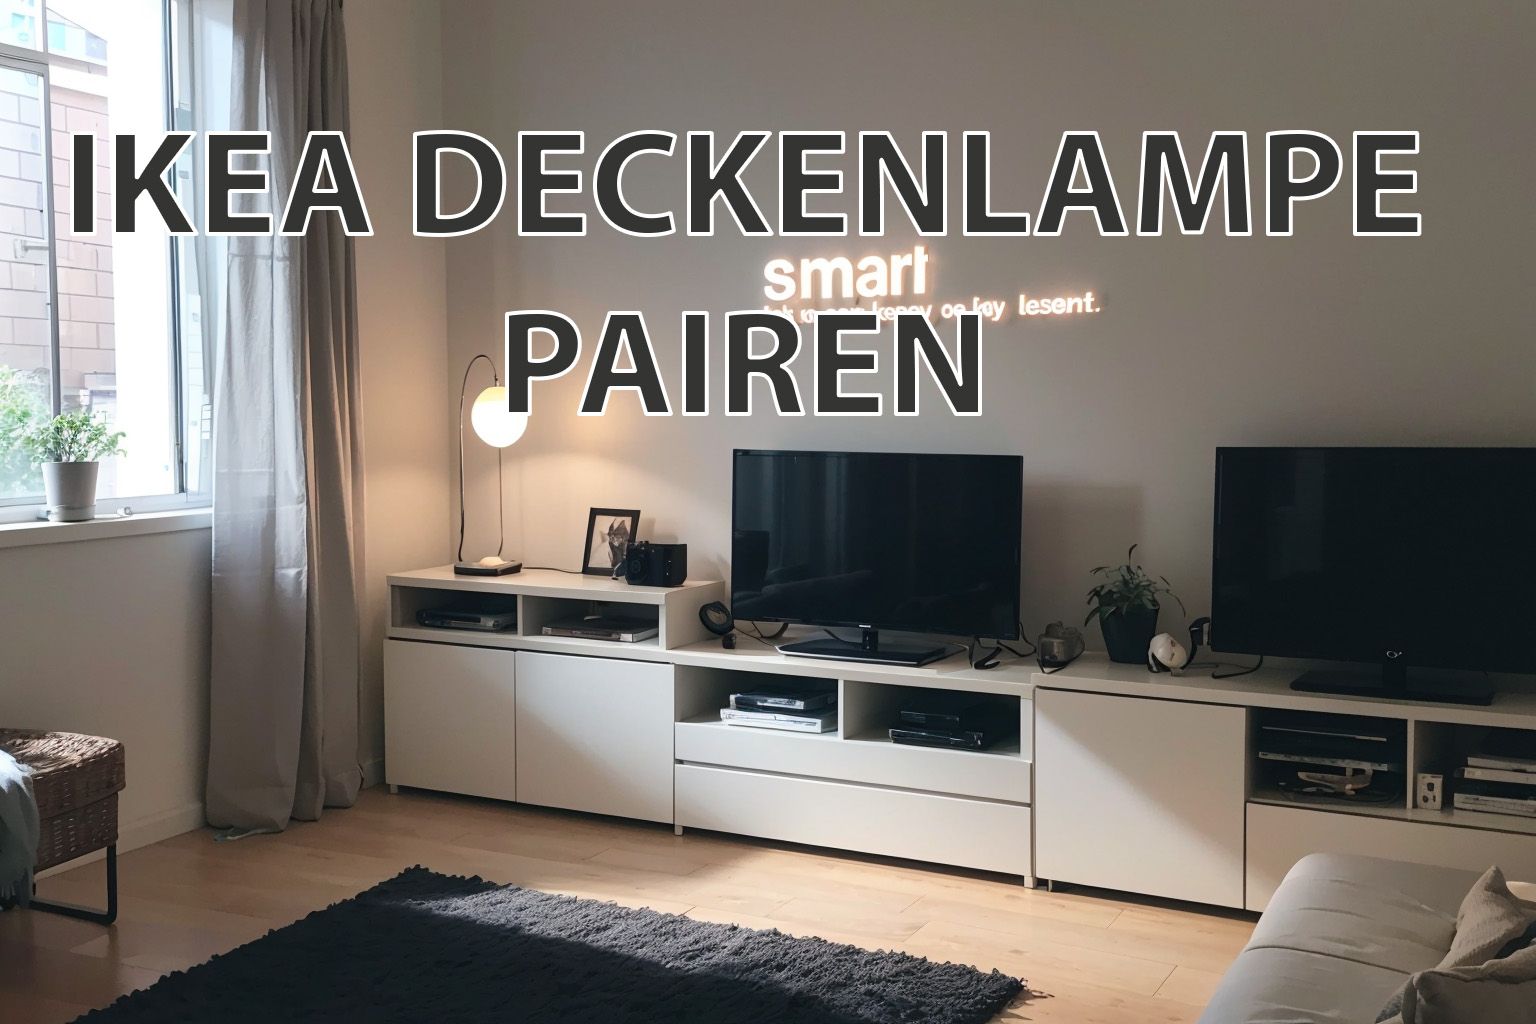 Homeassistant: How to put IKEA ceiling lamp in pairing mode